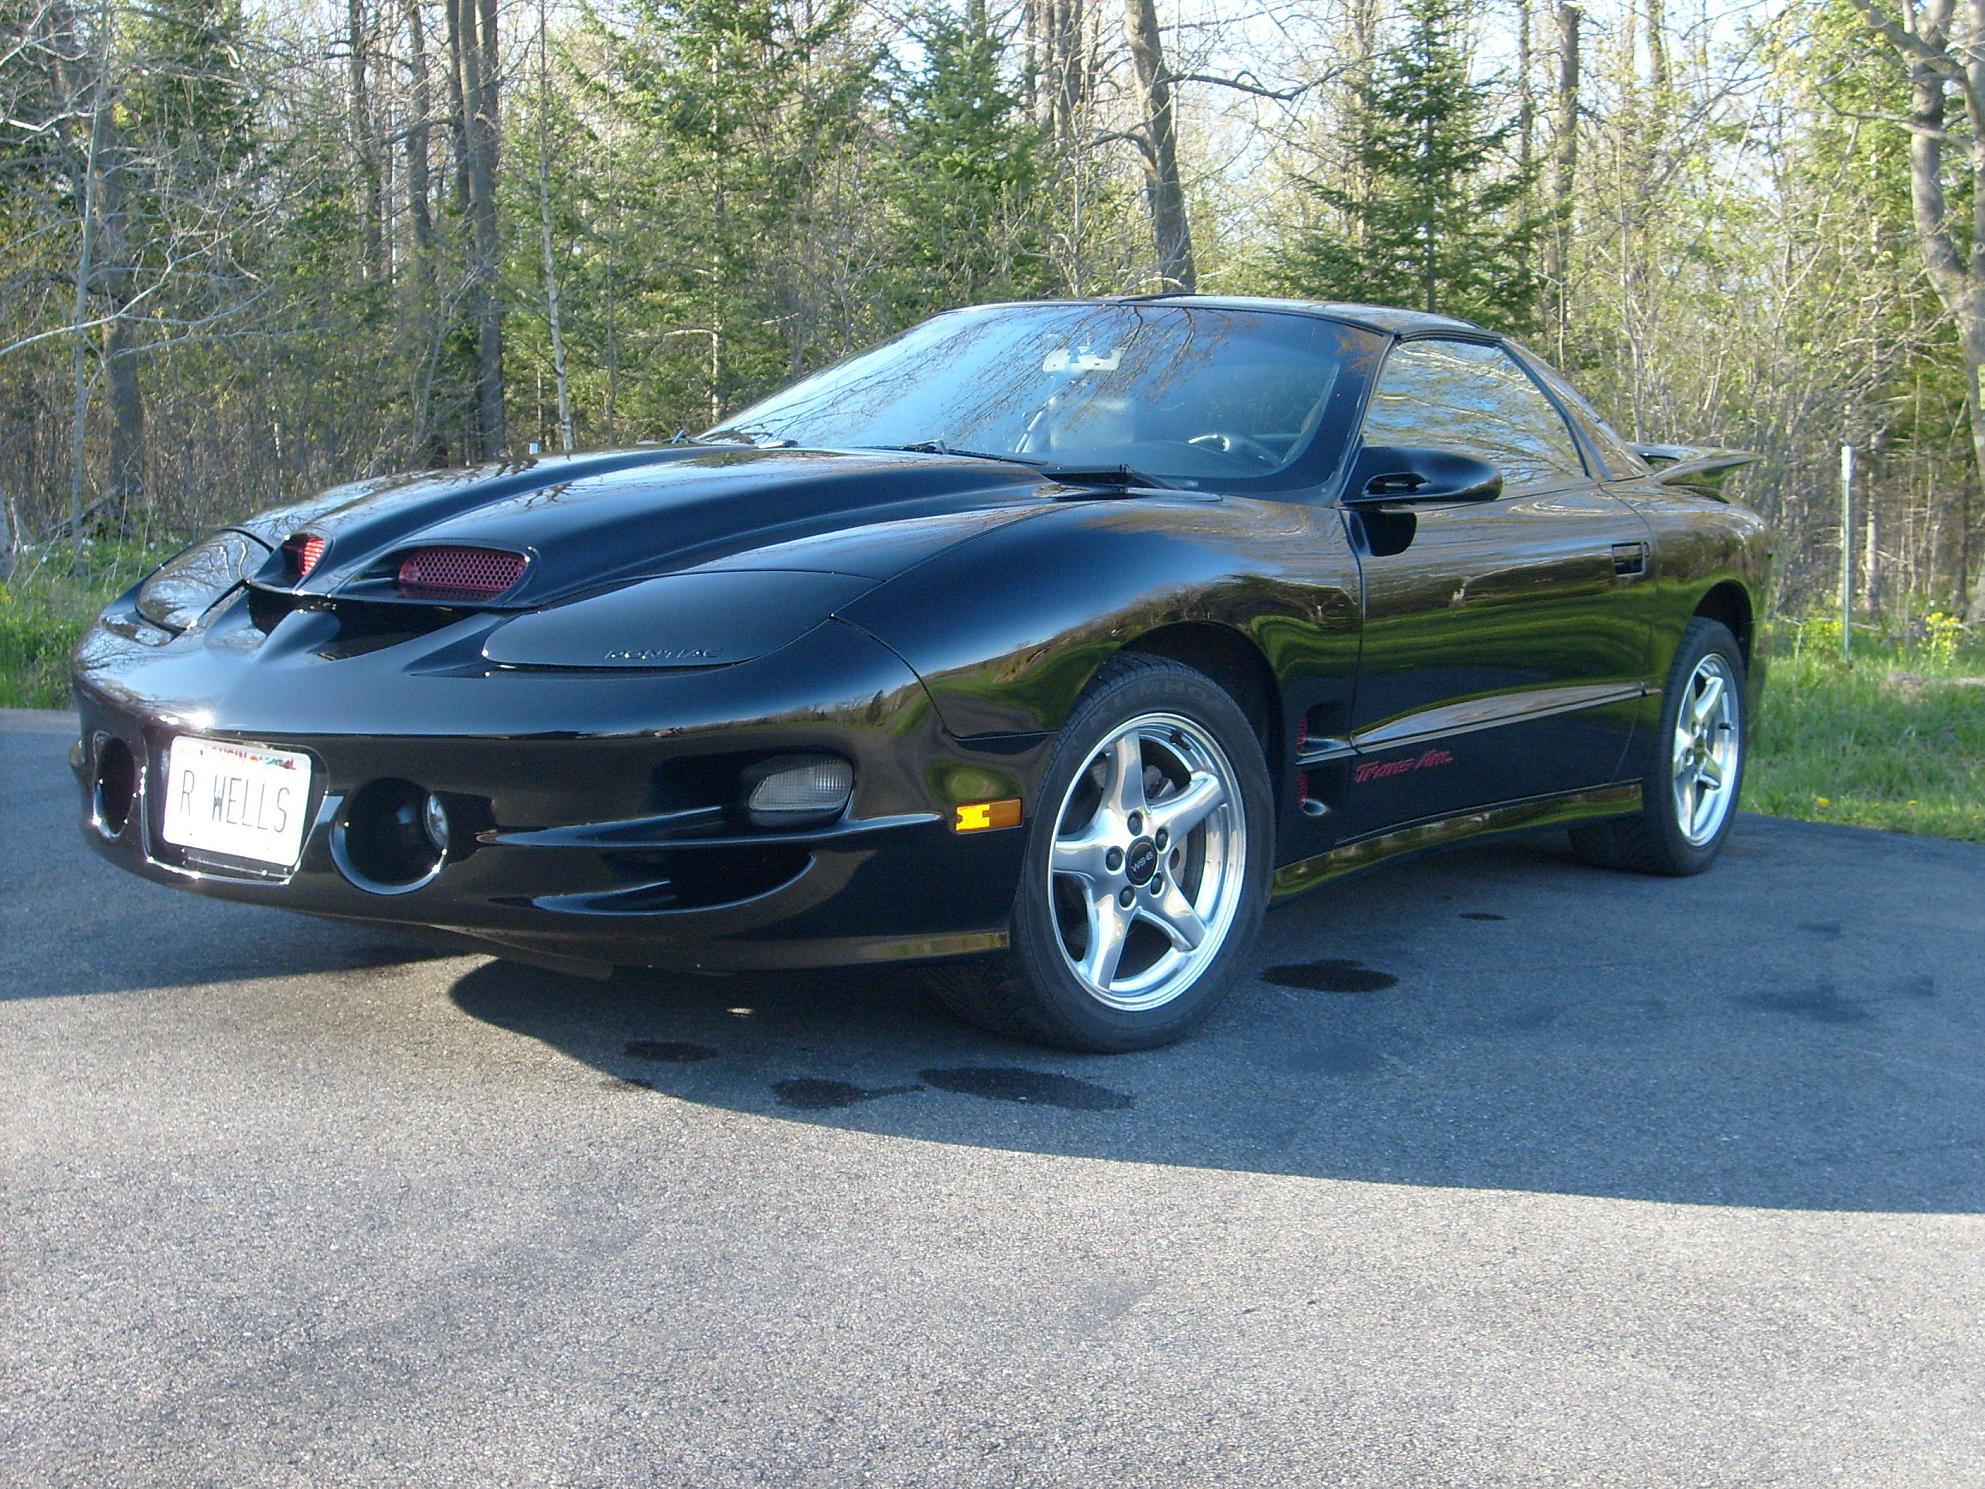 2000 Turbo charged Trans Am WS6 540 HP - LS1TECH - Camaro and Firebird